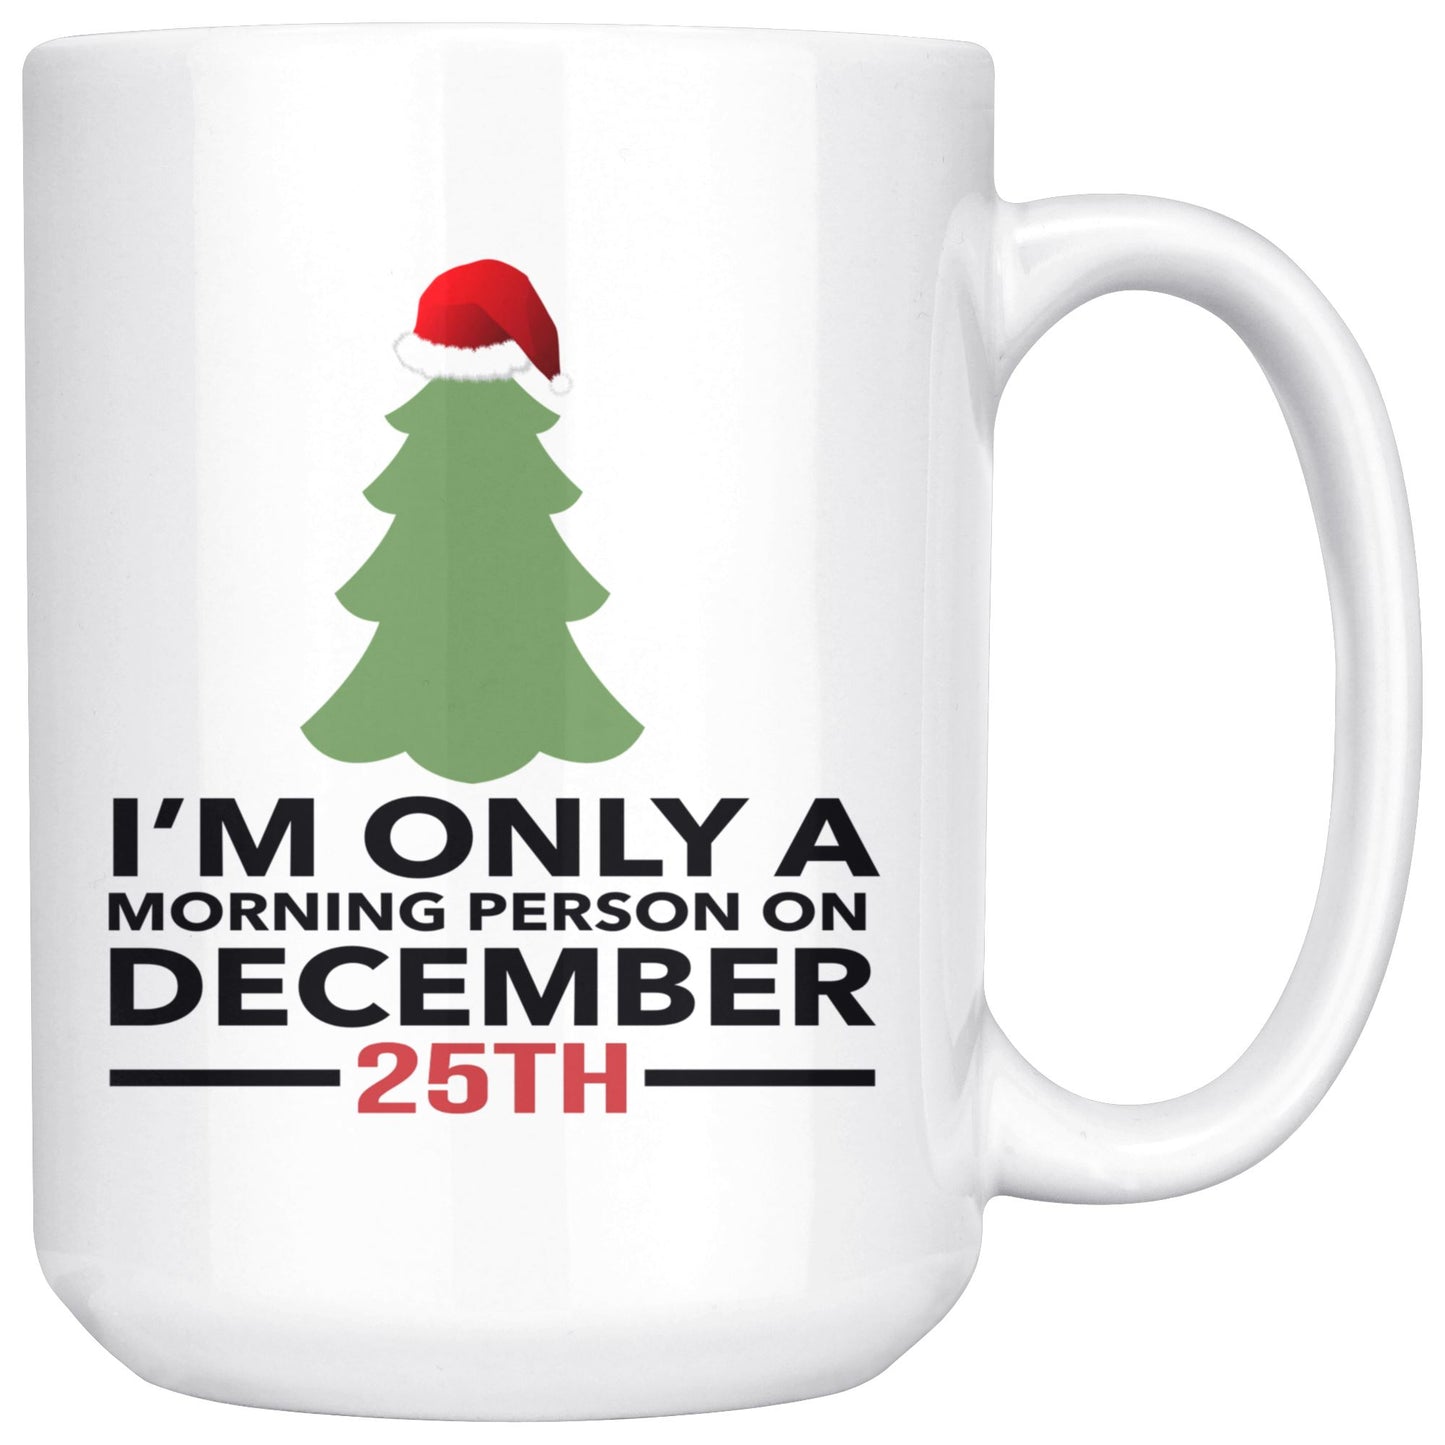 "I'm Only A Morning Person On December 25th" - Coffee Mug Drinkware White - 15oz 